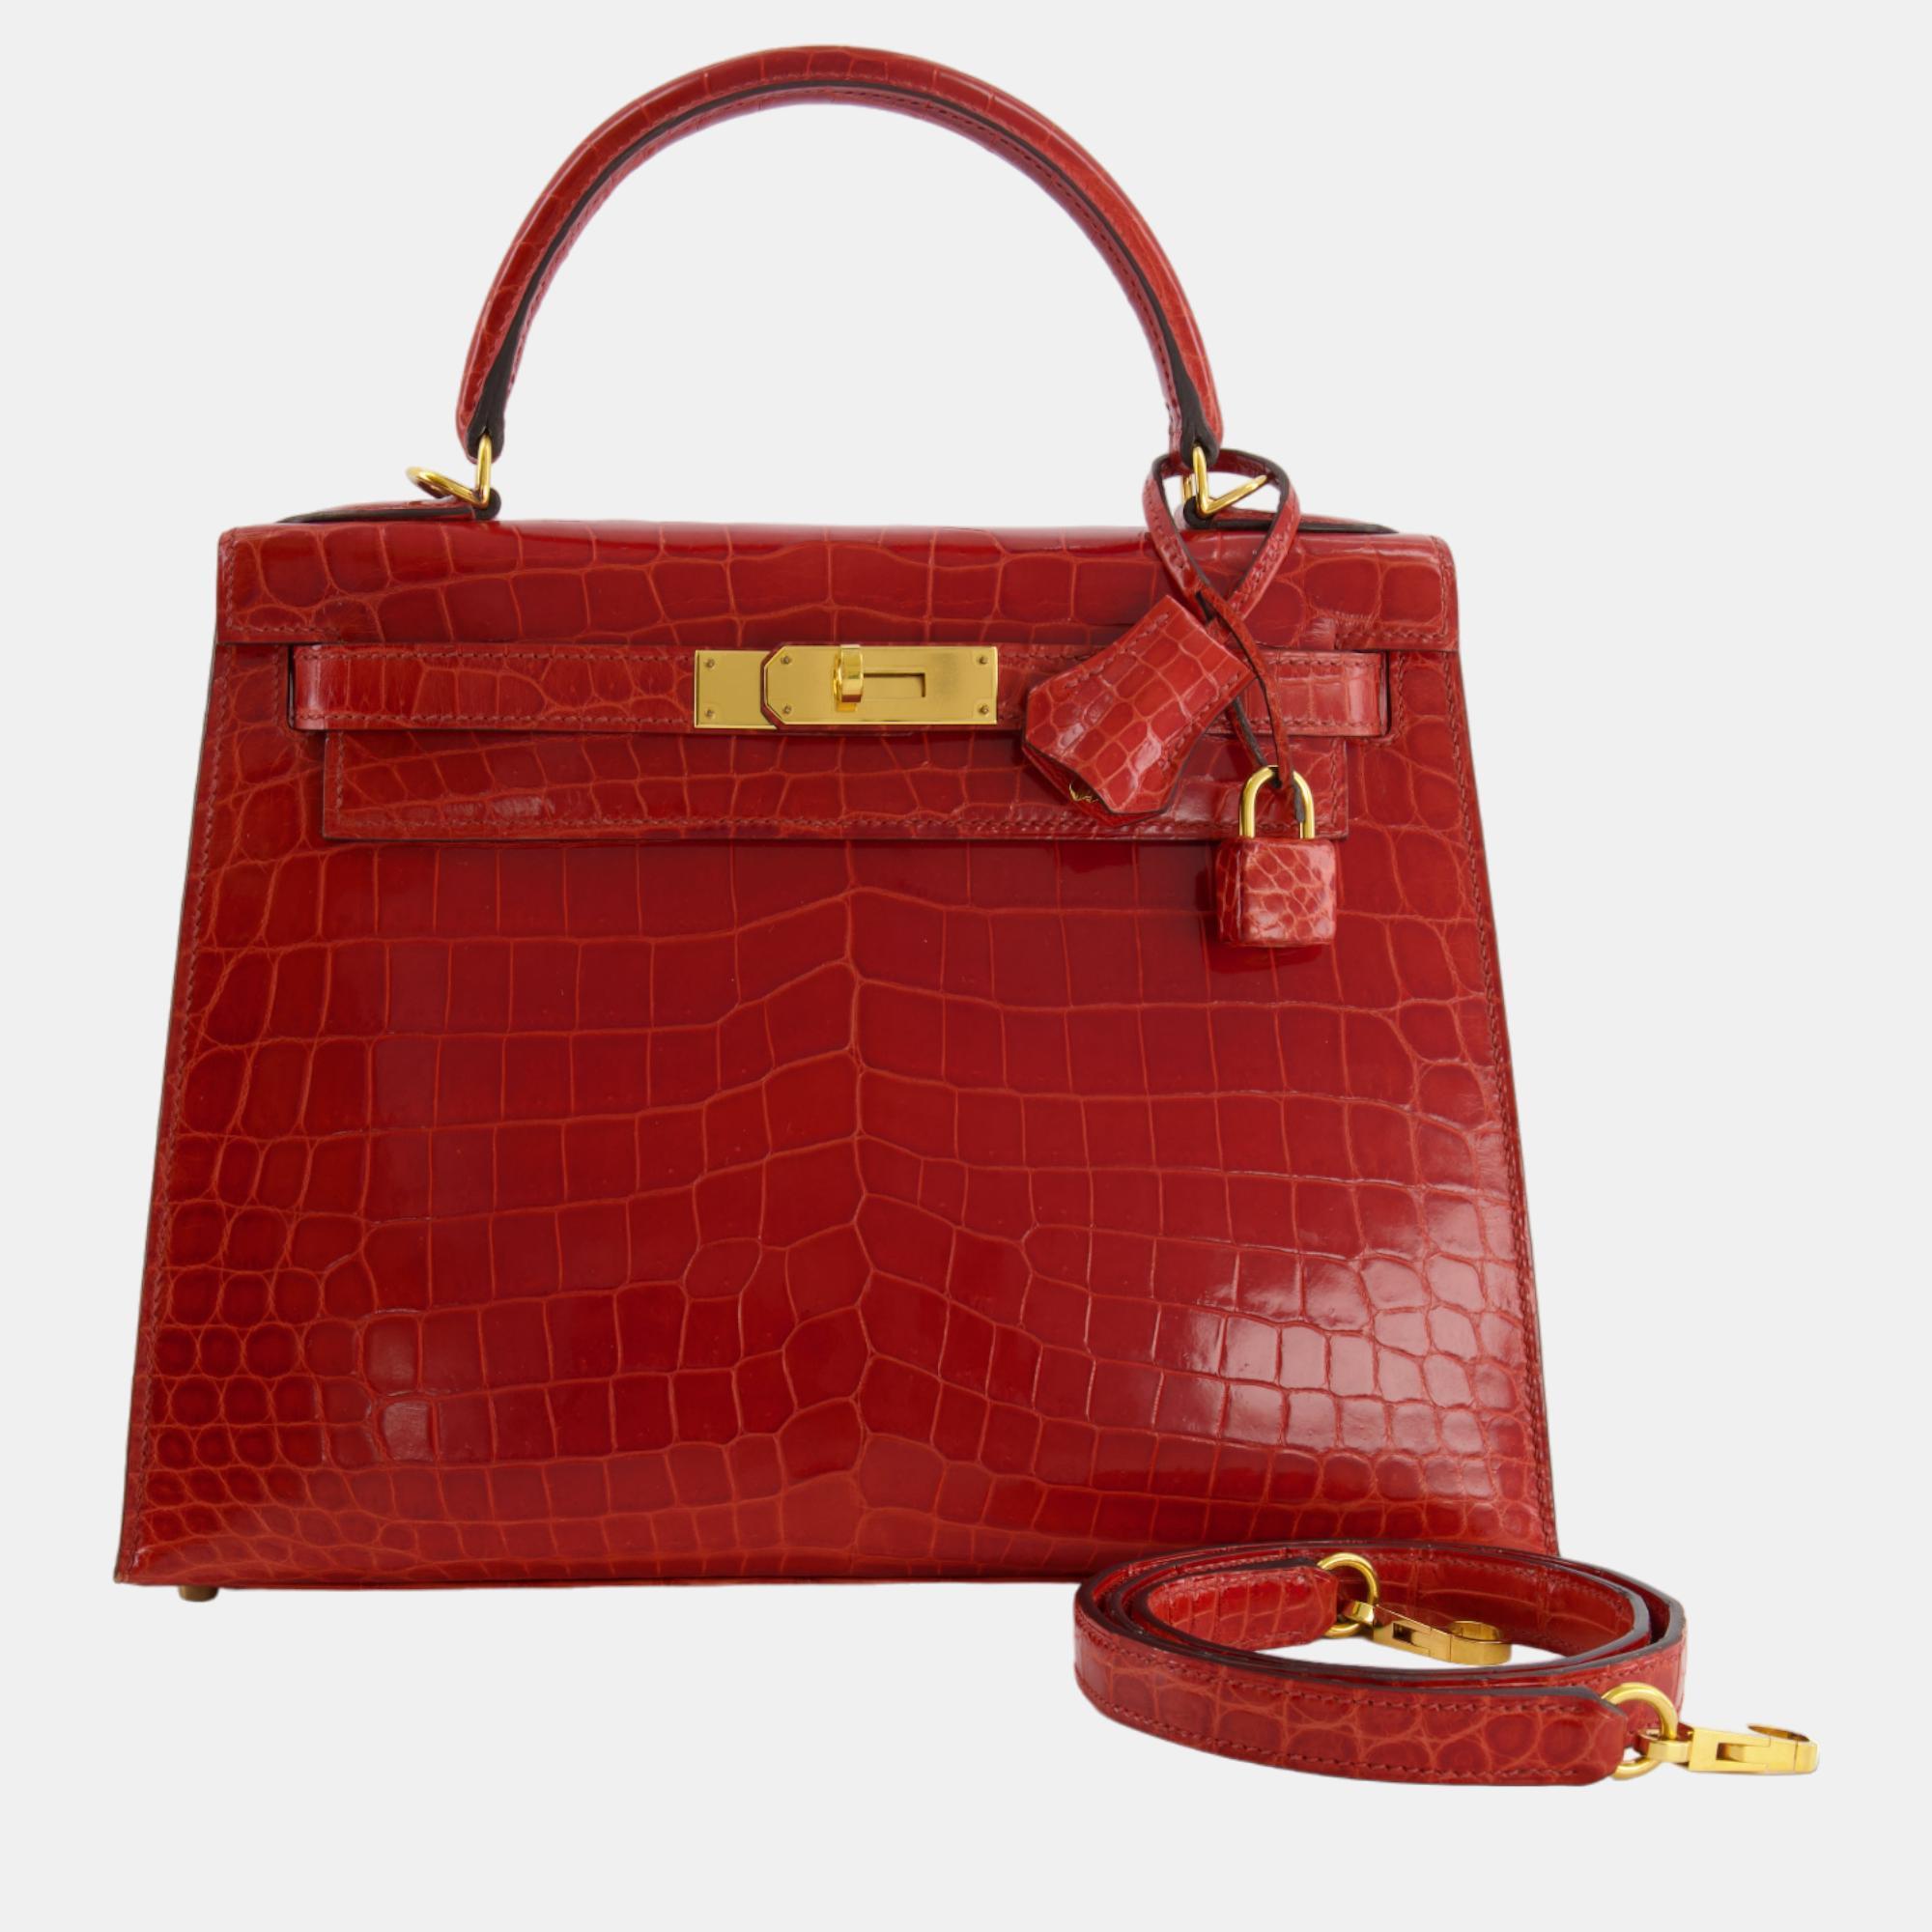 Hermes Kelly Bag 28cm In Sanguine Crocodile Niloticus Leather With Gold Hardware